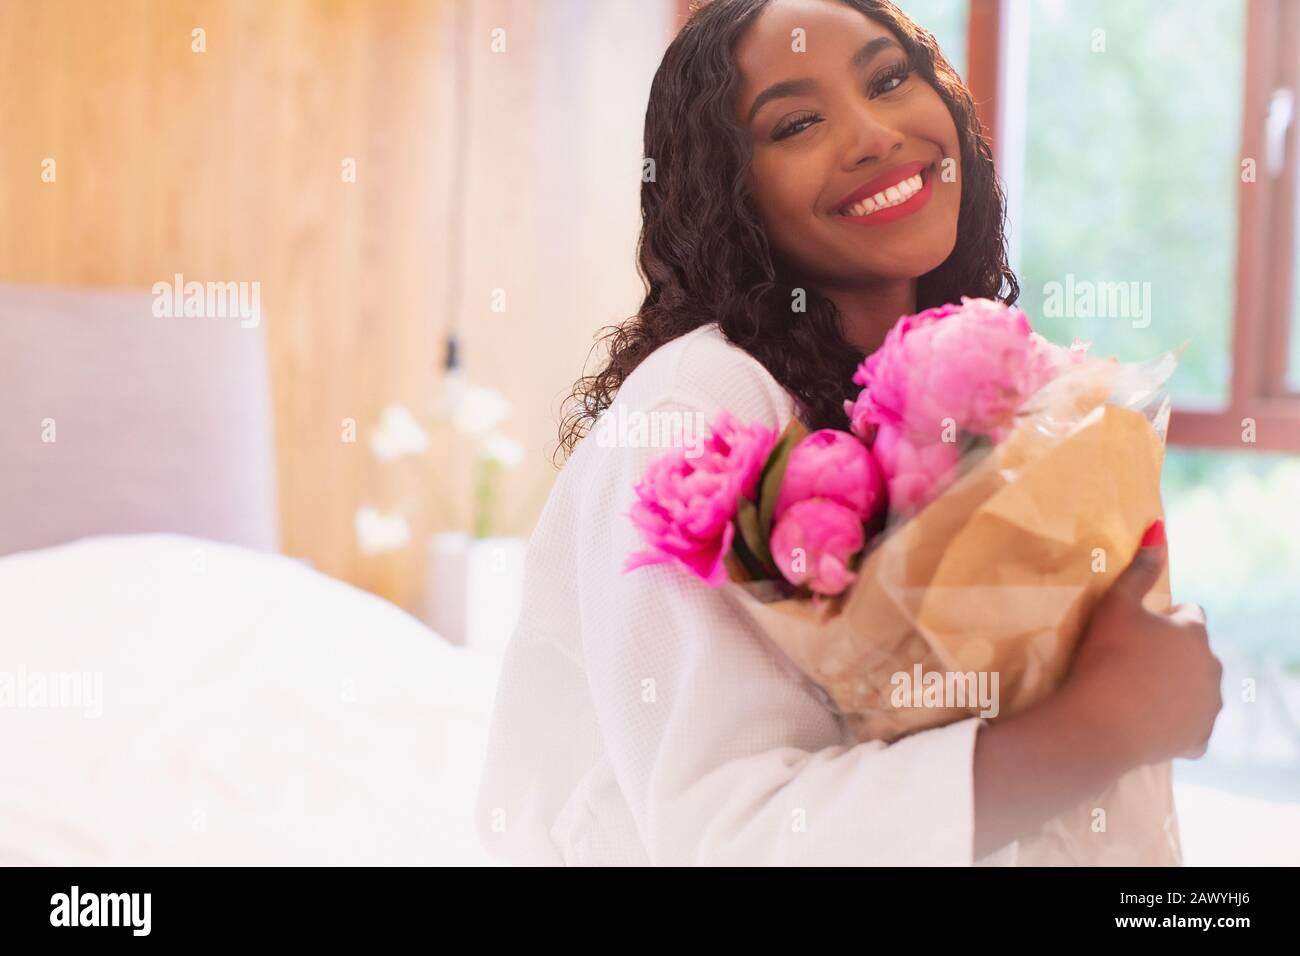 Portrait happy young woman with bouquet of pink peony flowers Stock Photo